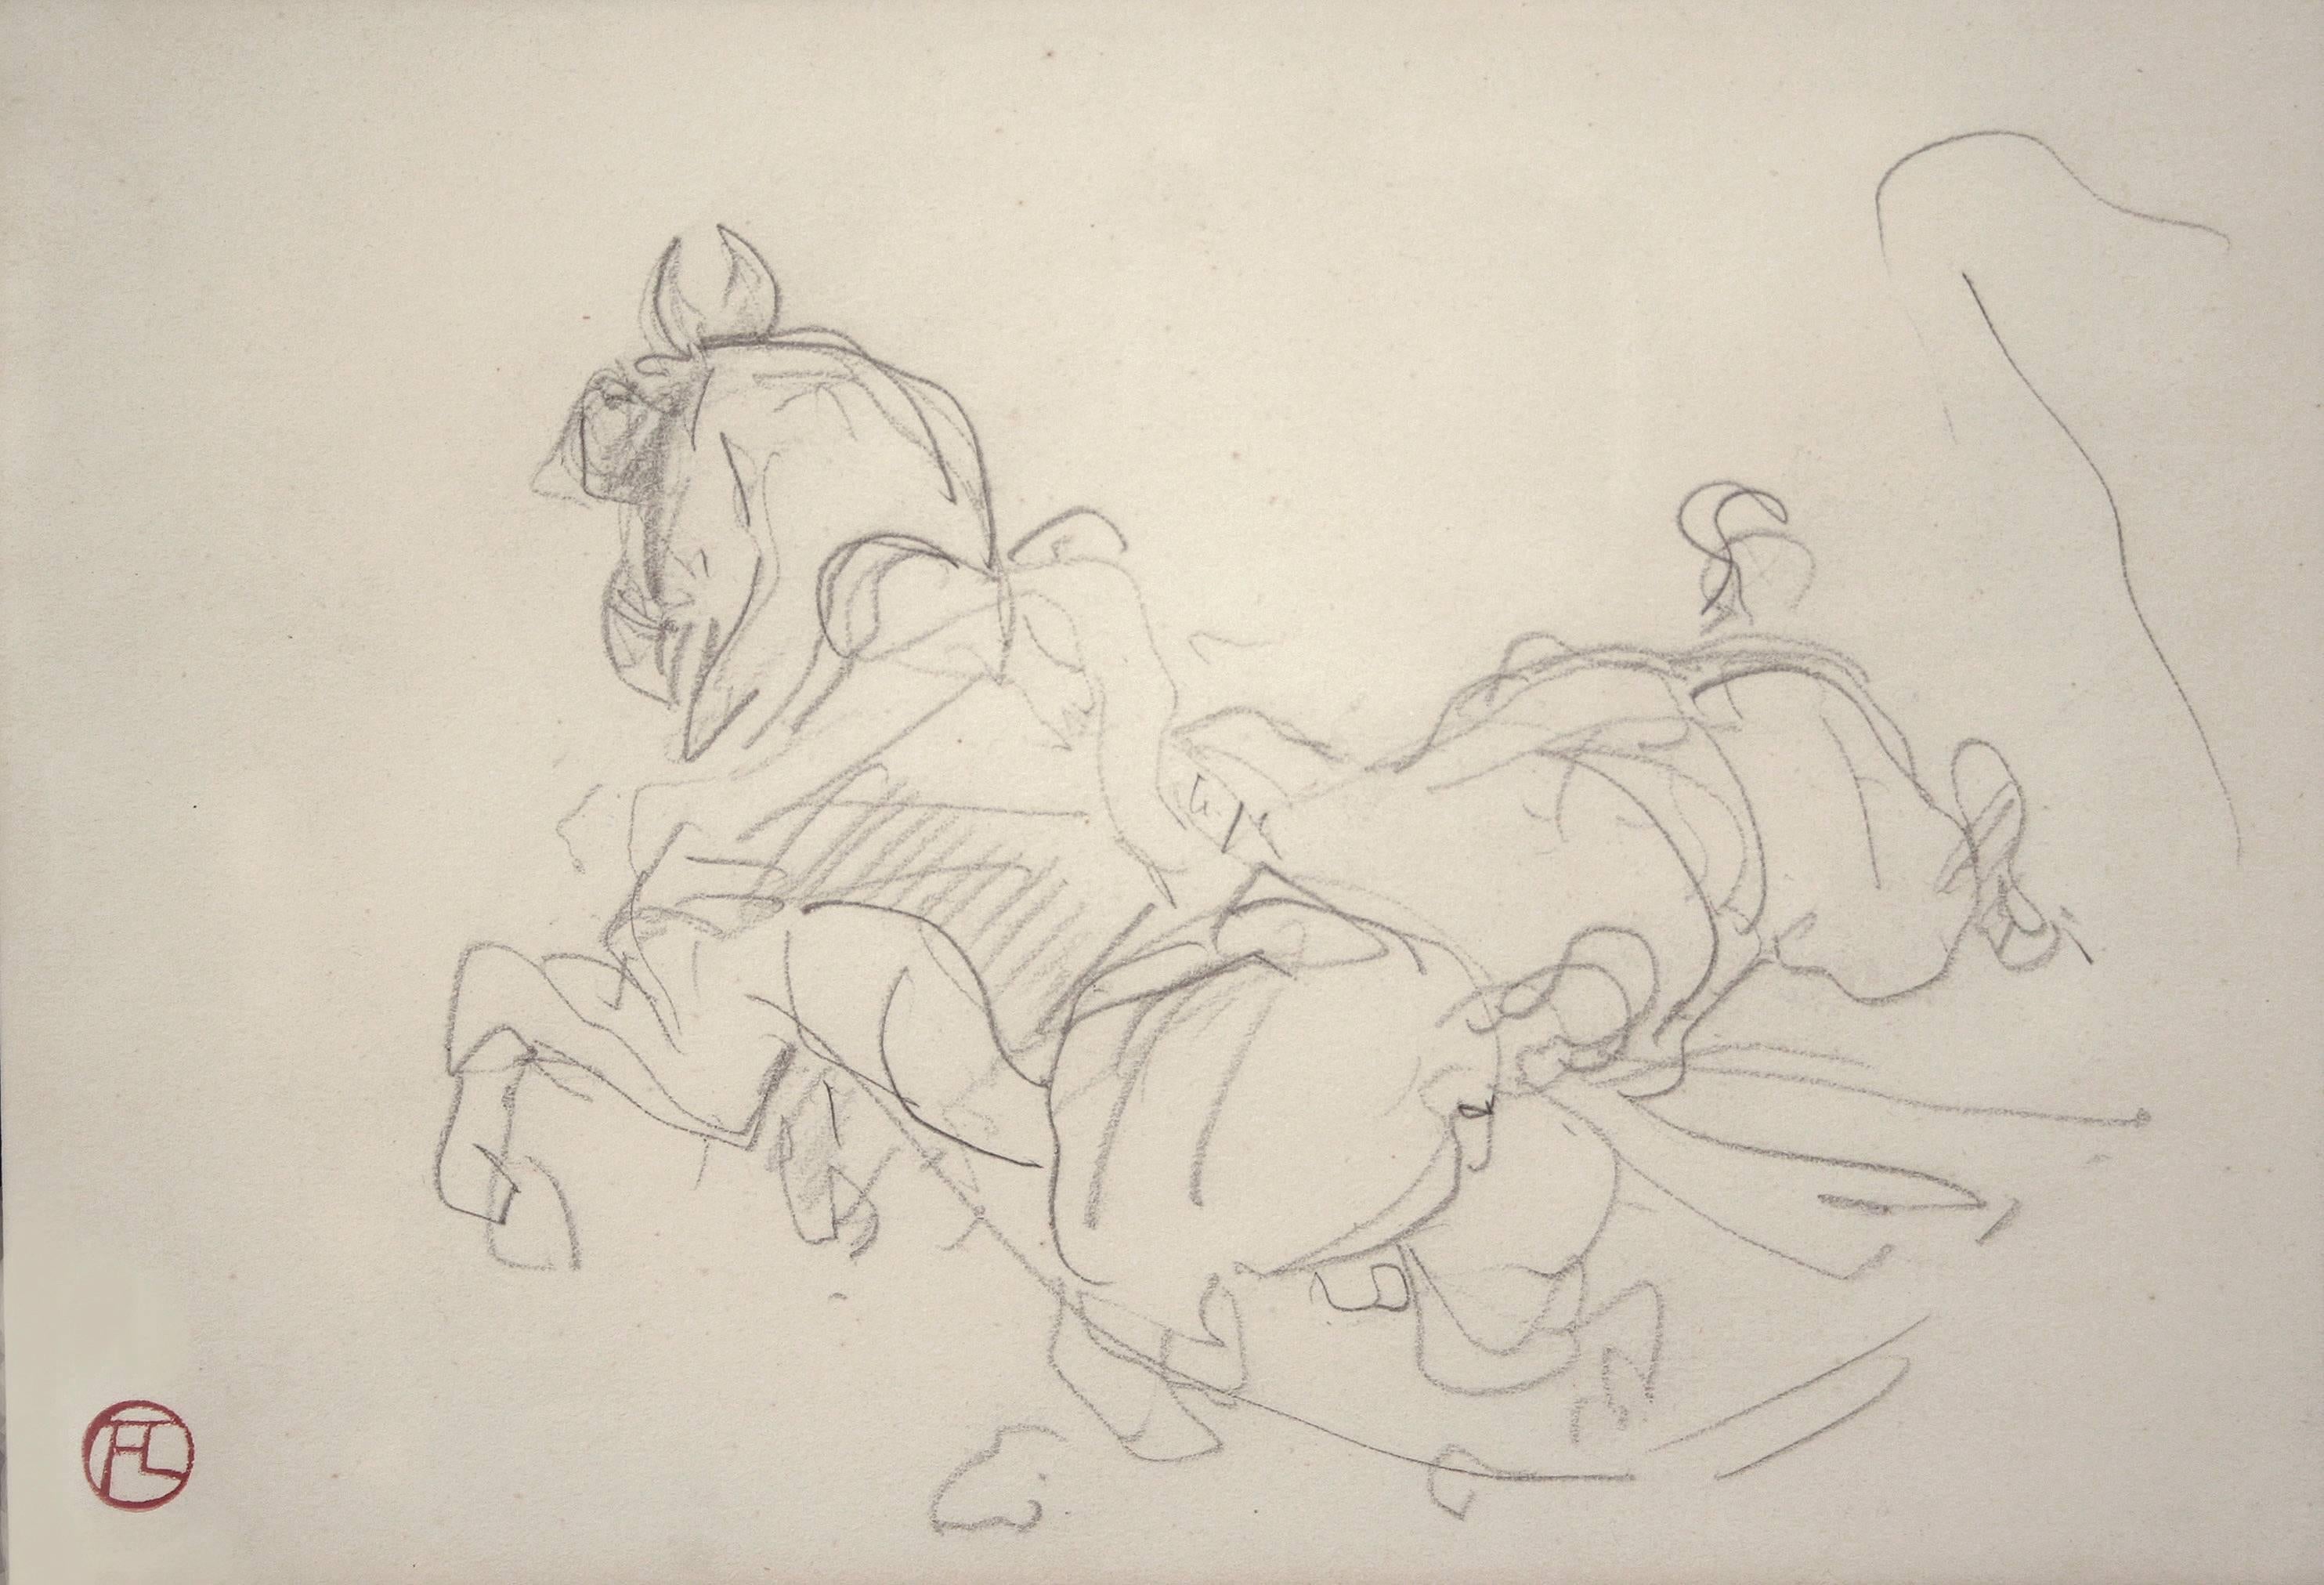 &quot;Chevaux,&quot; an original pencil drawing by Henri de Toulouse-Lautrec, 1881. Lautrec (1864-1901) began drawing at a young age, when frequent illnesses kept him bedridden at his home in Albi; this piece was created when he was in his teens.